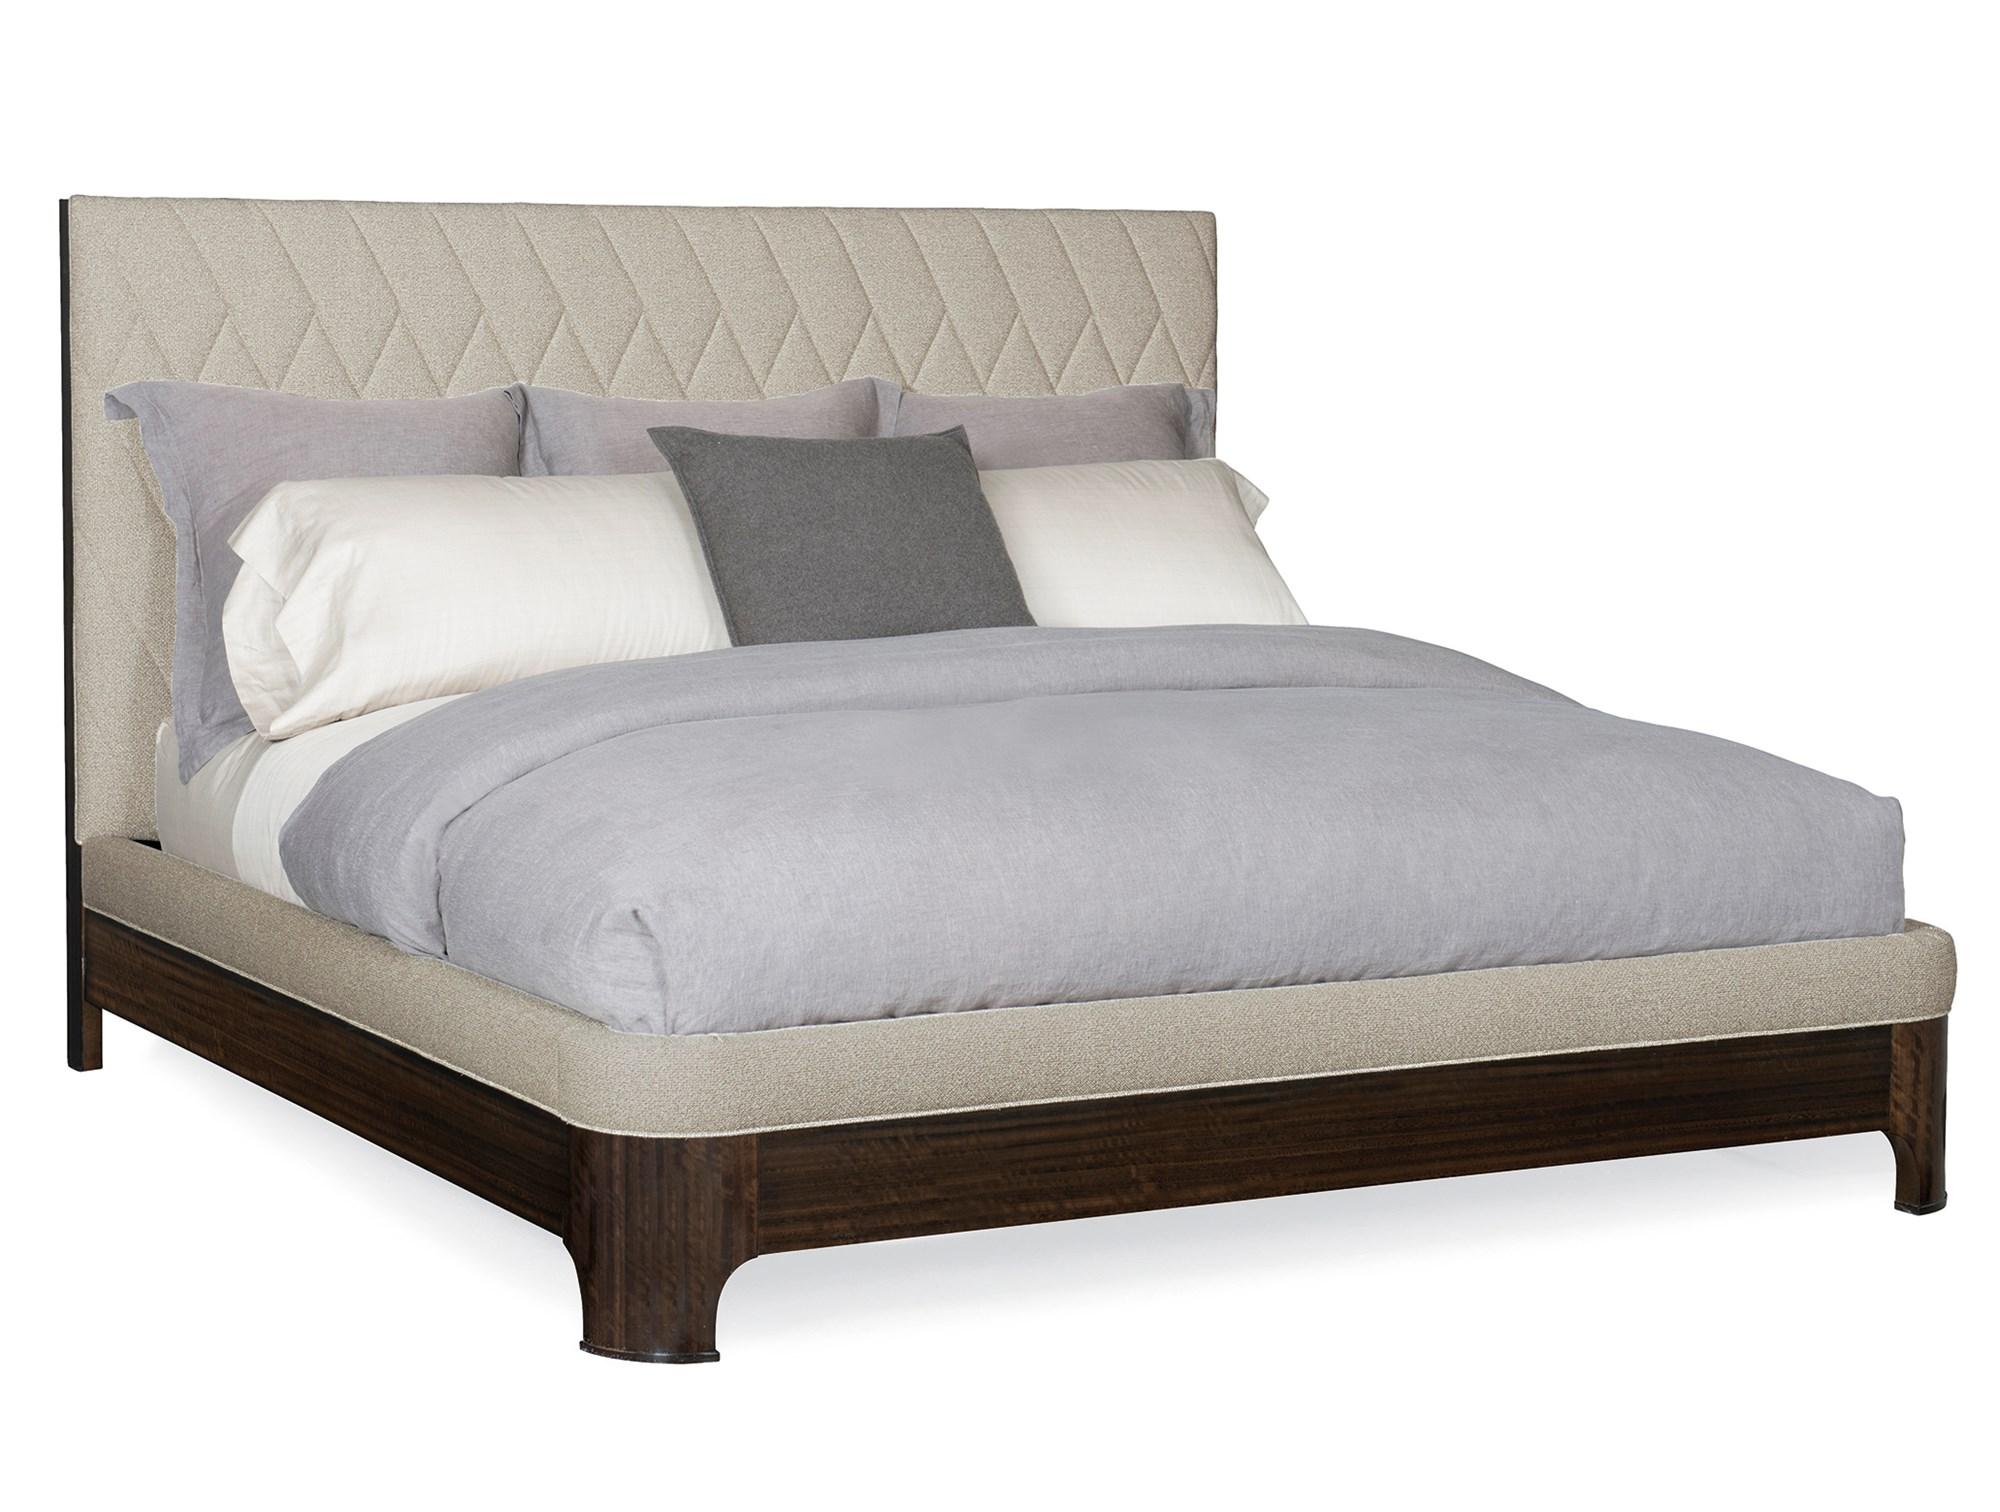 Contemporary Platform Bed MODERNE BED M023-417-121 in Neutral Fabric